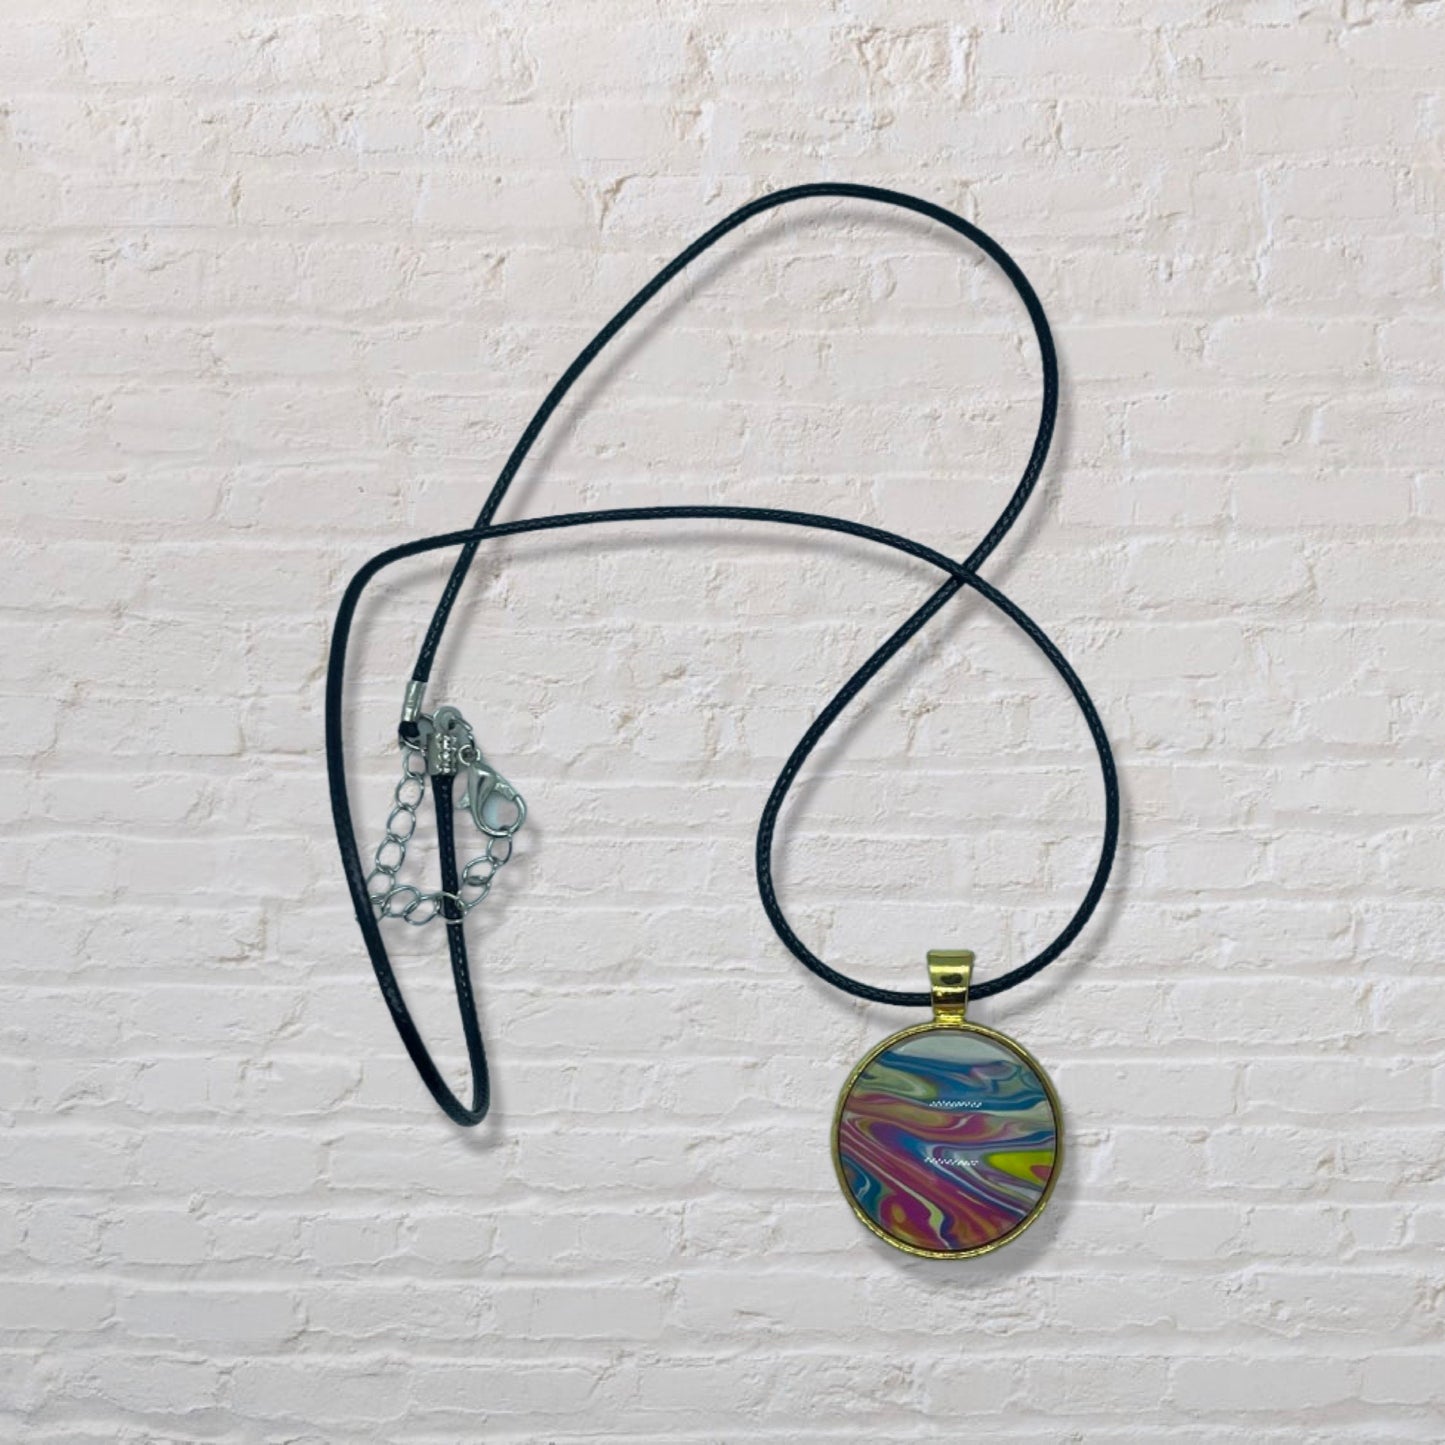 By The Kids -- Paint Pour Necklace - Pink, Yellow, Blue and White